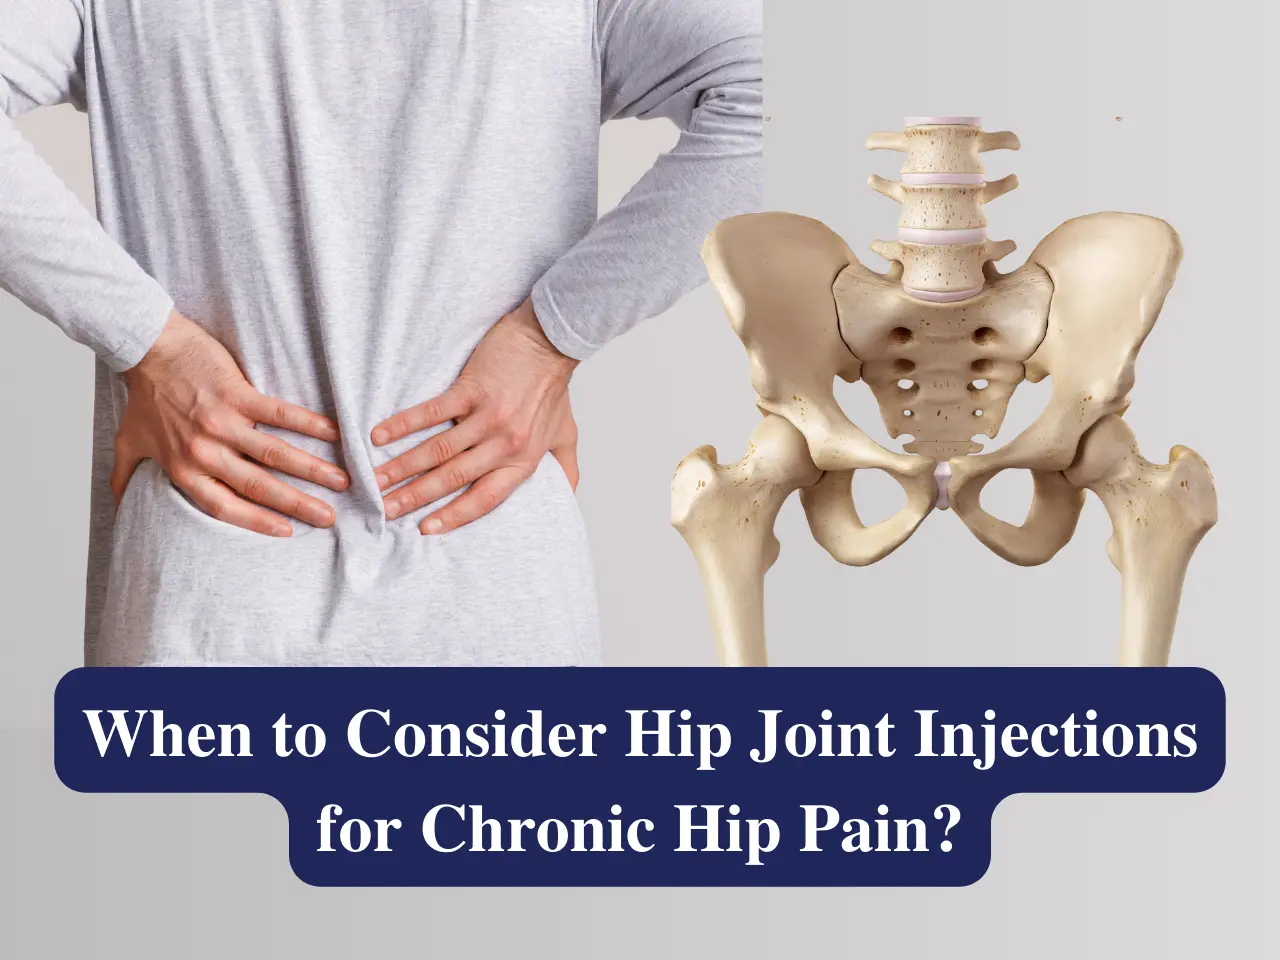 Hip Joint Injections for Chronic Hip Pain